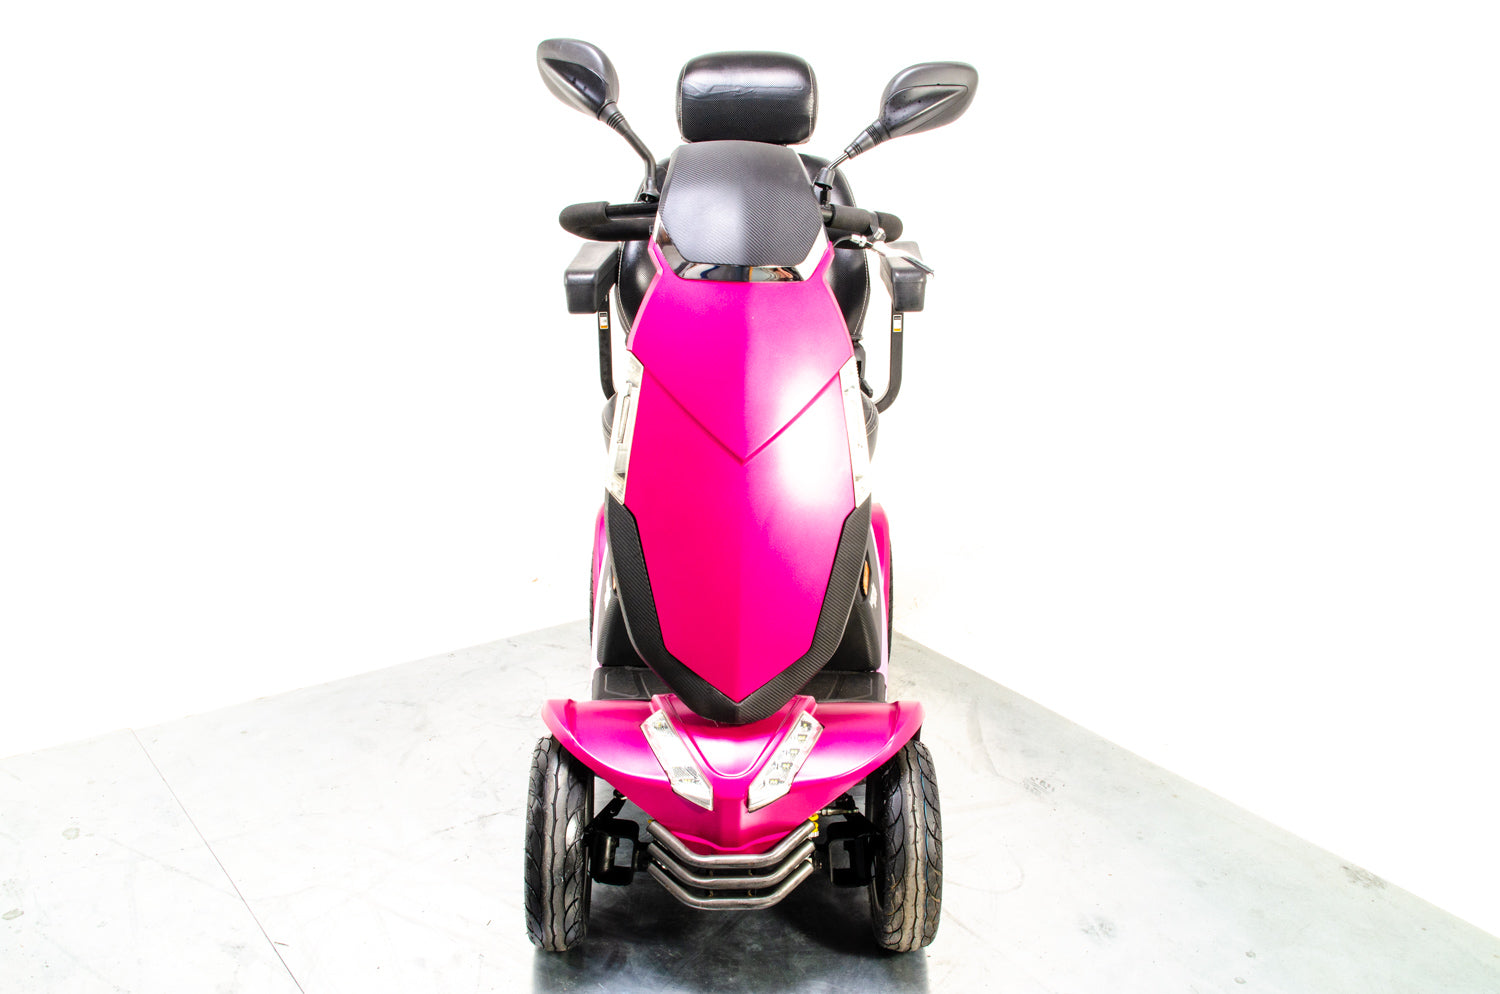 2018 Vecta Sport from Electric Mobility 8mph Midsized Mobility Scooter Pink